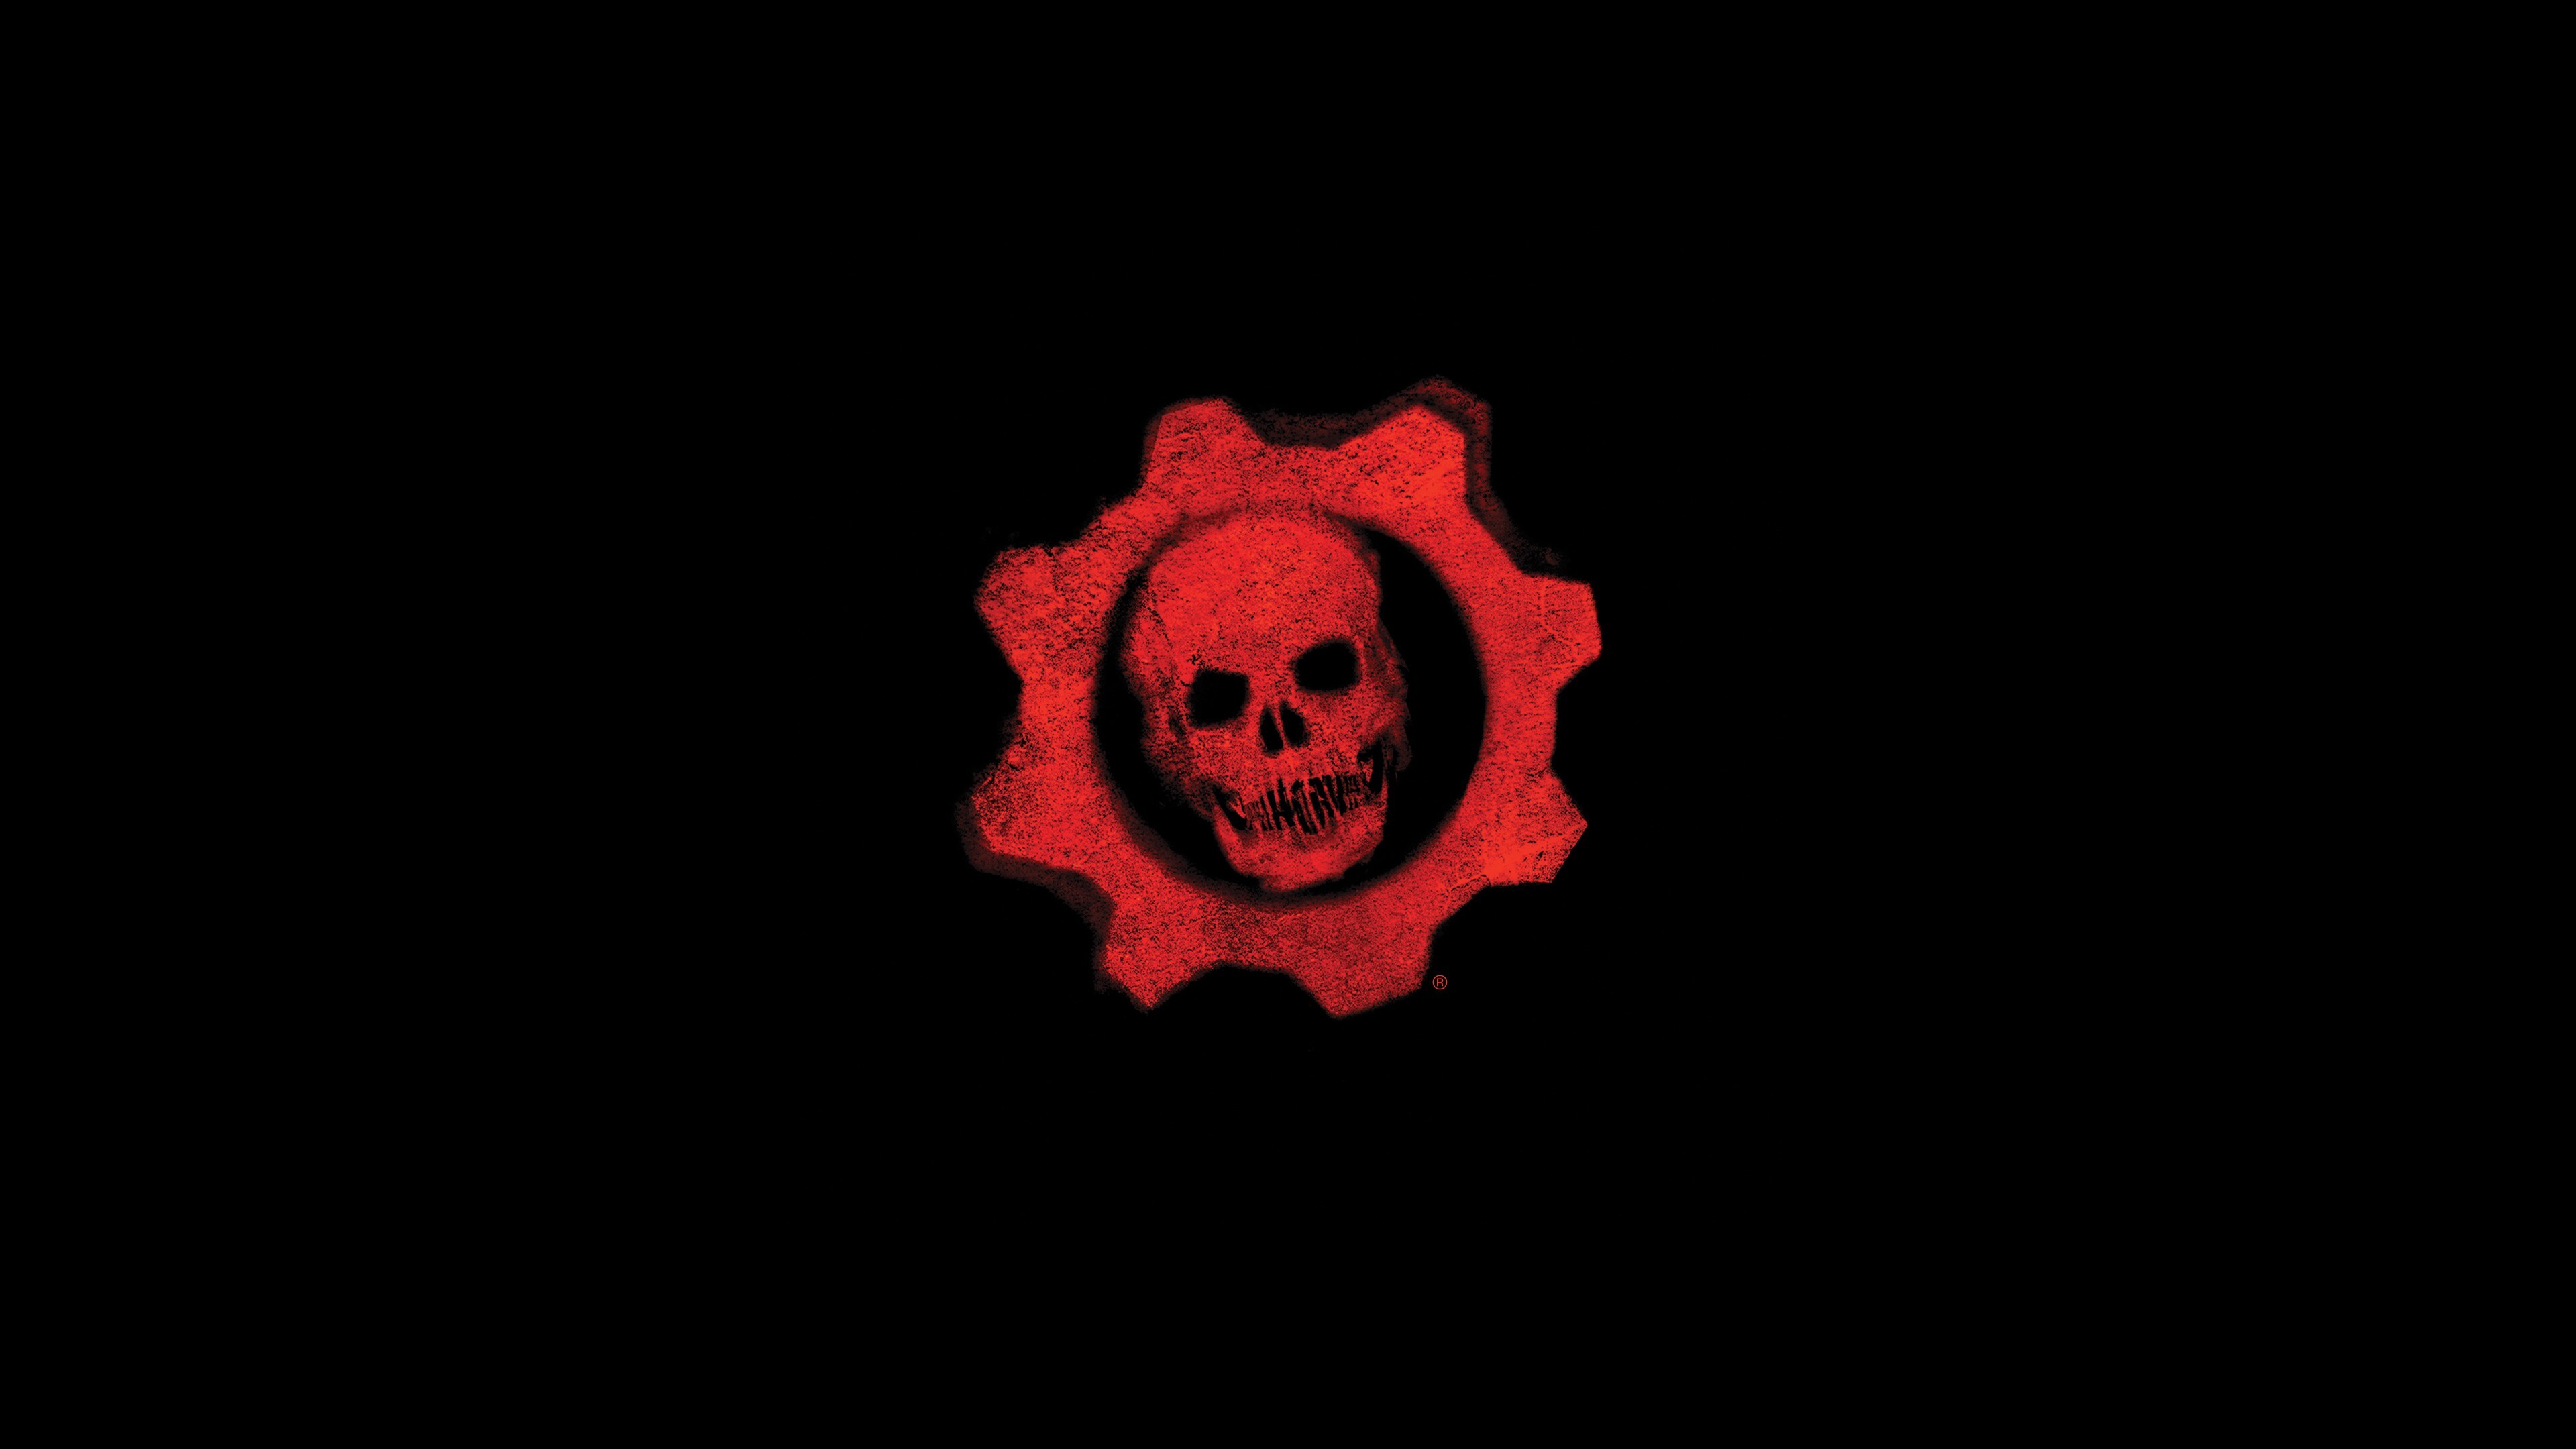 Gears of War: A 2006 third-person shooter video game developed by Epic Games, Unreal Engine 3. 3840x2160 4K Wallpaper.